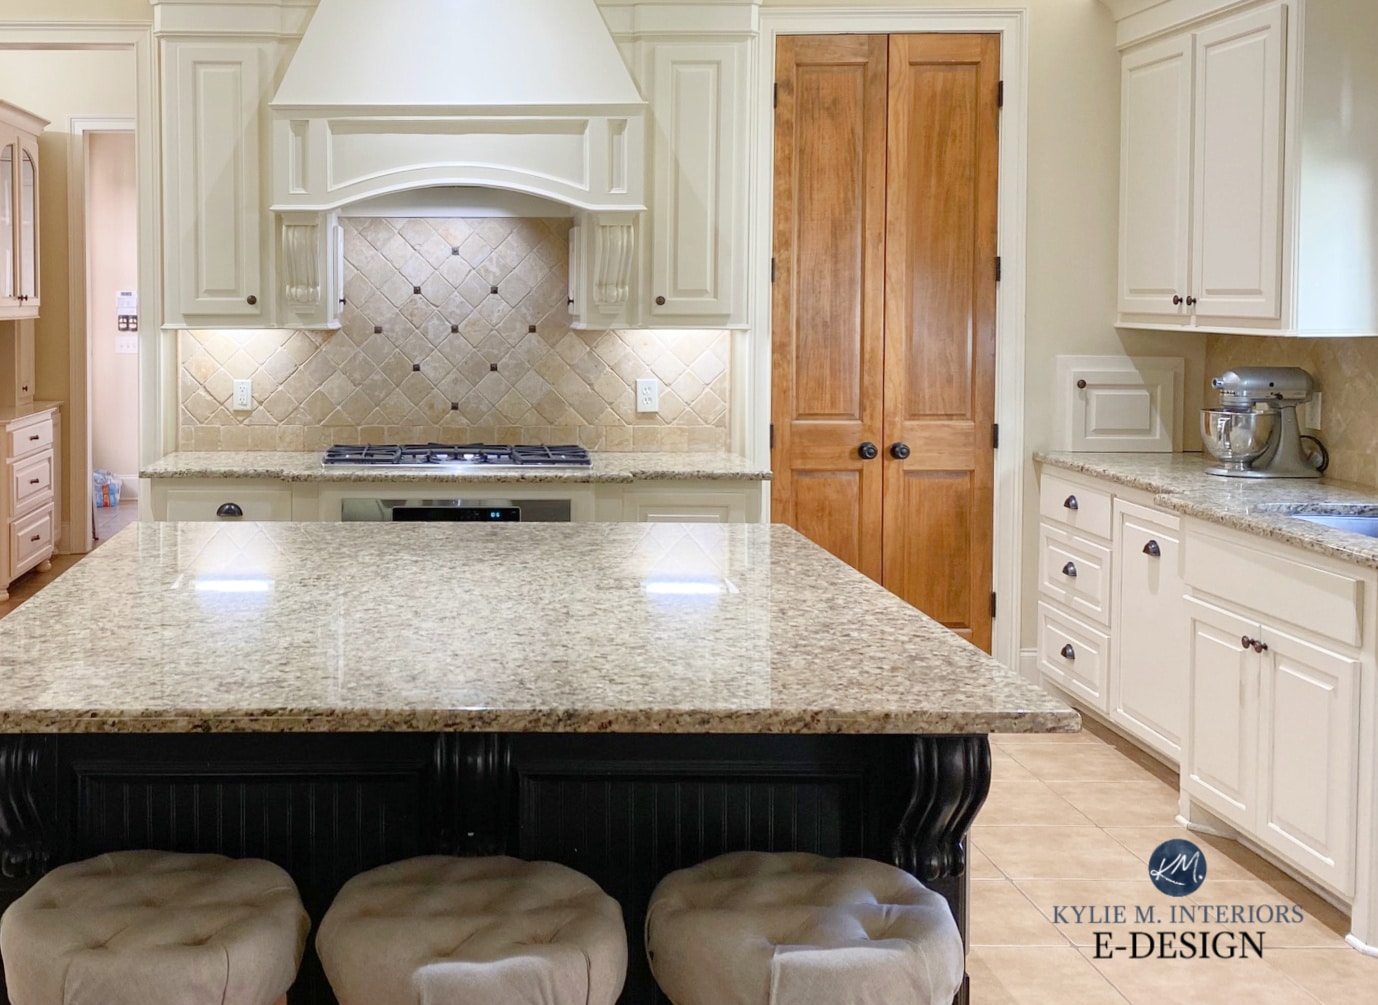 How To Update Your Older Granite Countertops Kylie M Interiors